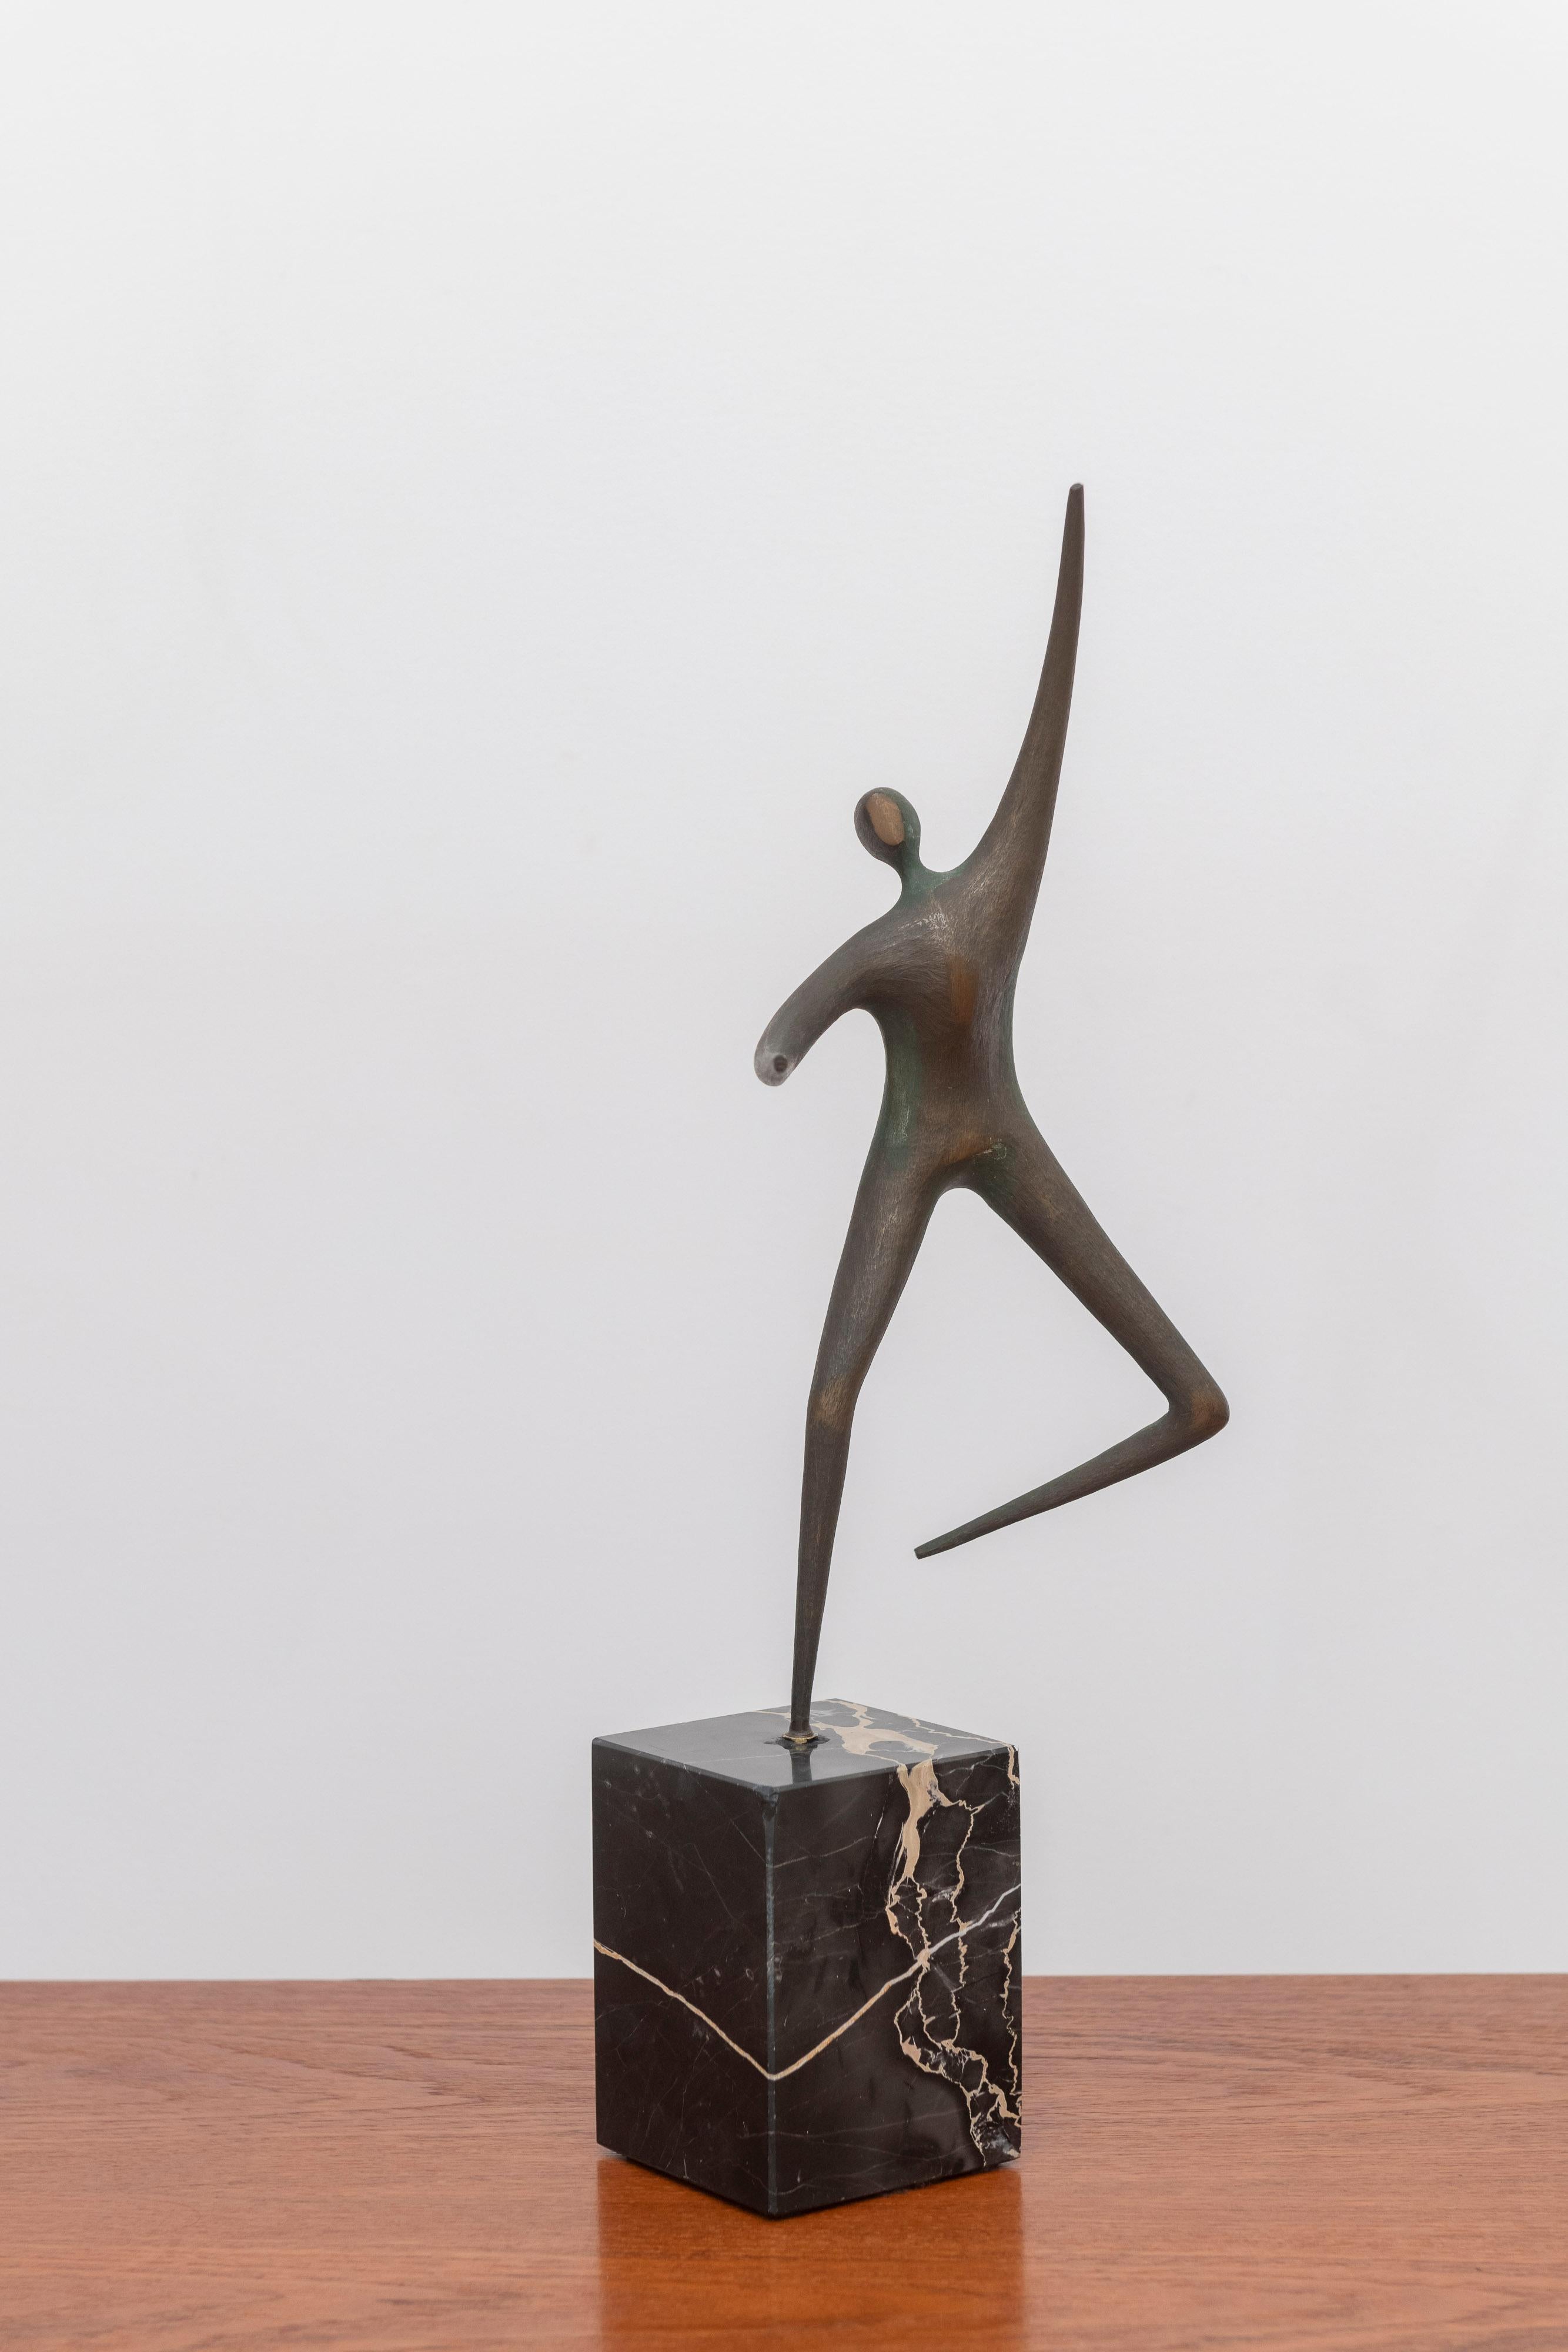 A Curtis Jere dancer brass table sculpture. This is a very dynamic sculpture from artist Curtis Jere. It showcases a dancer that can be spun to face different directions. This piece is made from a very heavy brass and is supported by a solid marble